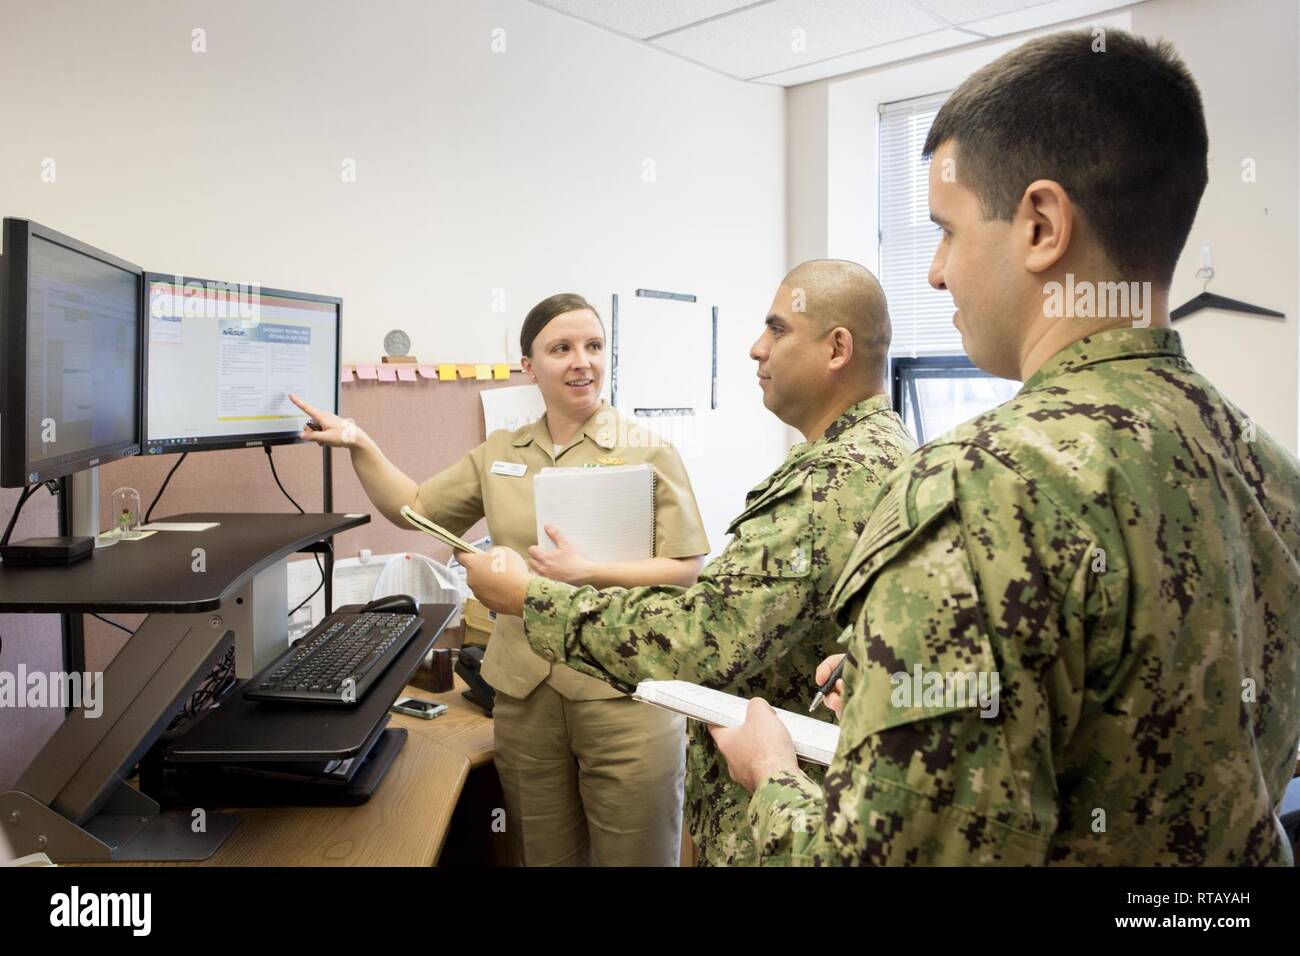 NSA PHILADELPHIA (Feb. 4, 2019) -- U.S. Navy Reserve logistics officers Lt. Cmdr. Anna Harris, Lt. Robert Romero and Lt. Douglas Macintosh discuss oversight testing for Naval Air Station Oceana on Feb. 4, 2019. The officers are part of NAVSUP WSS's Inventory Operations Center. Stock Photo